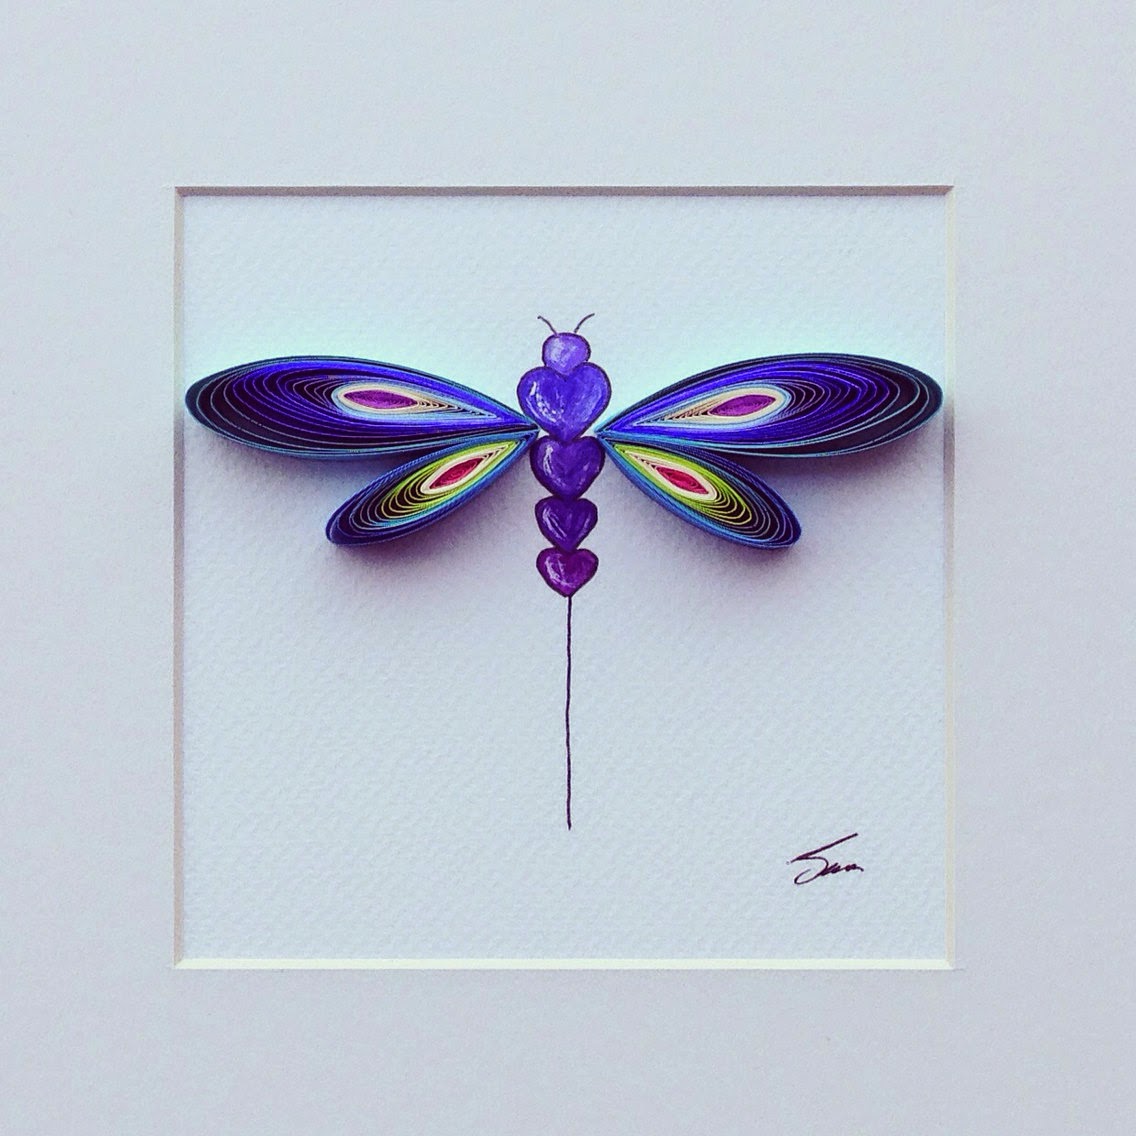 21-Dragonfly-Sena-Runa-Drawing-and-Quilling-a-match-made-in-Heaven-www-designstack-co